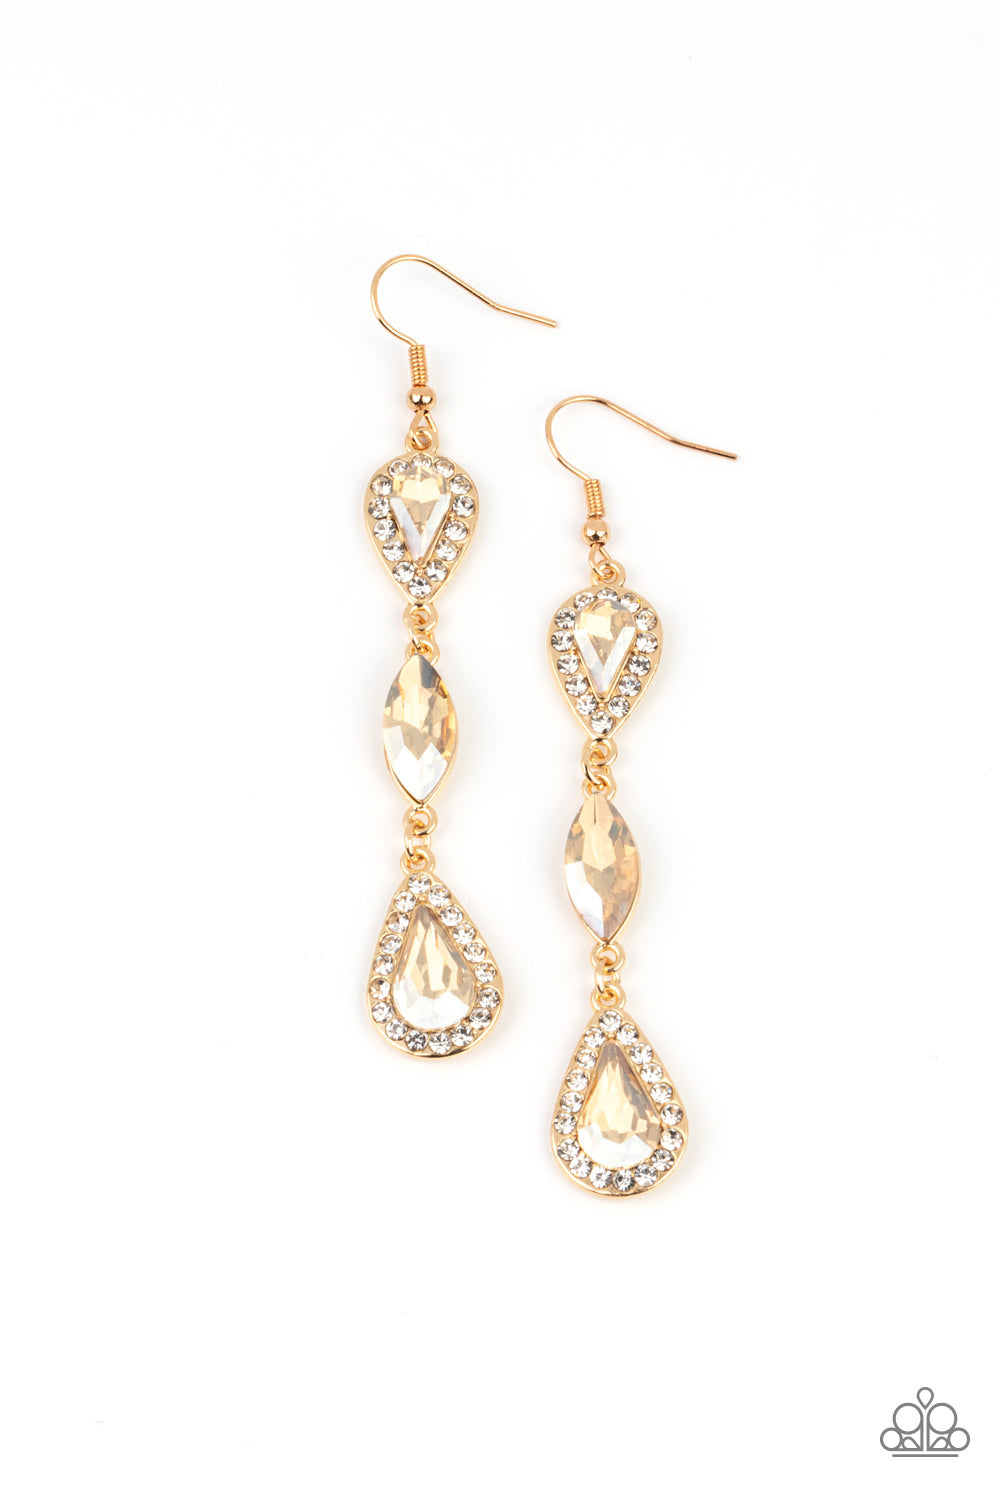 Test of TIMELESS - Gold Earrings - Princess Glam Shop